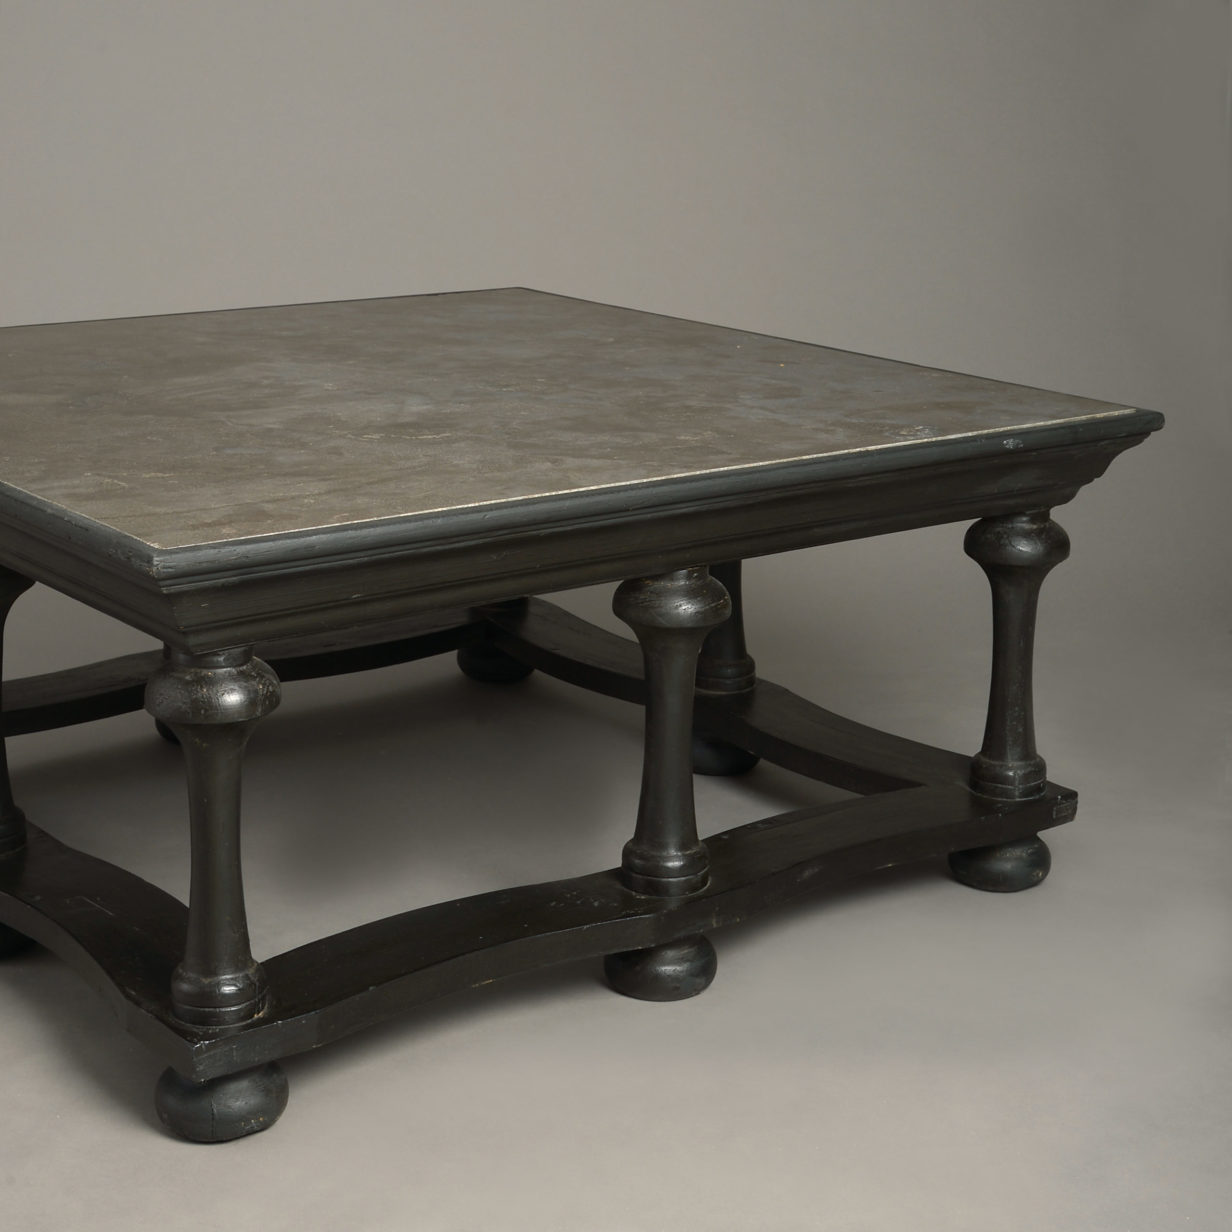 A Baroque Style Low or Coffee Table